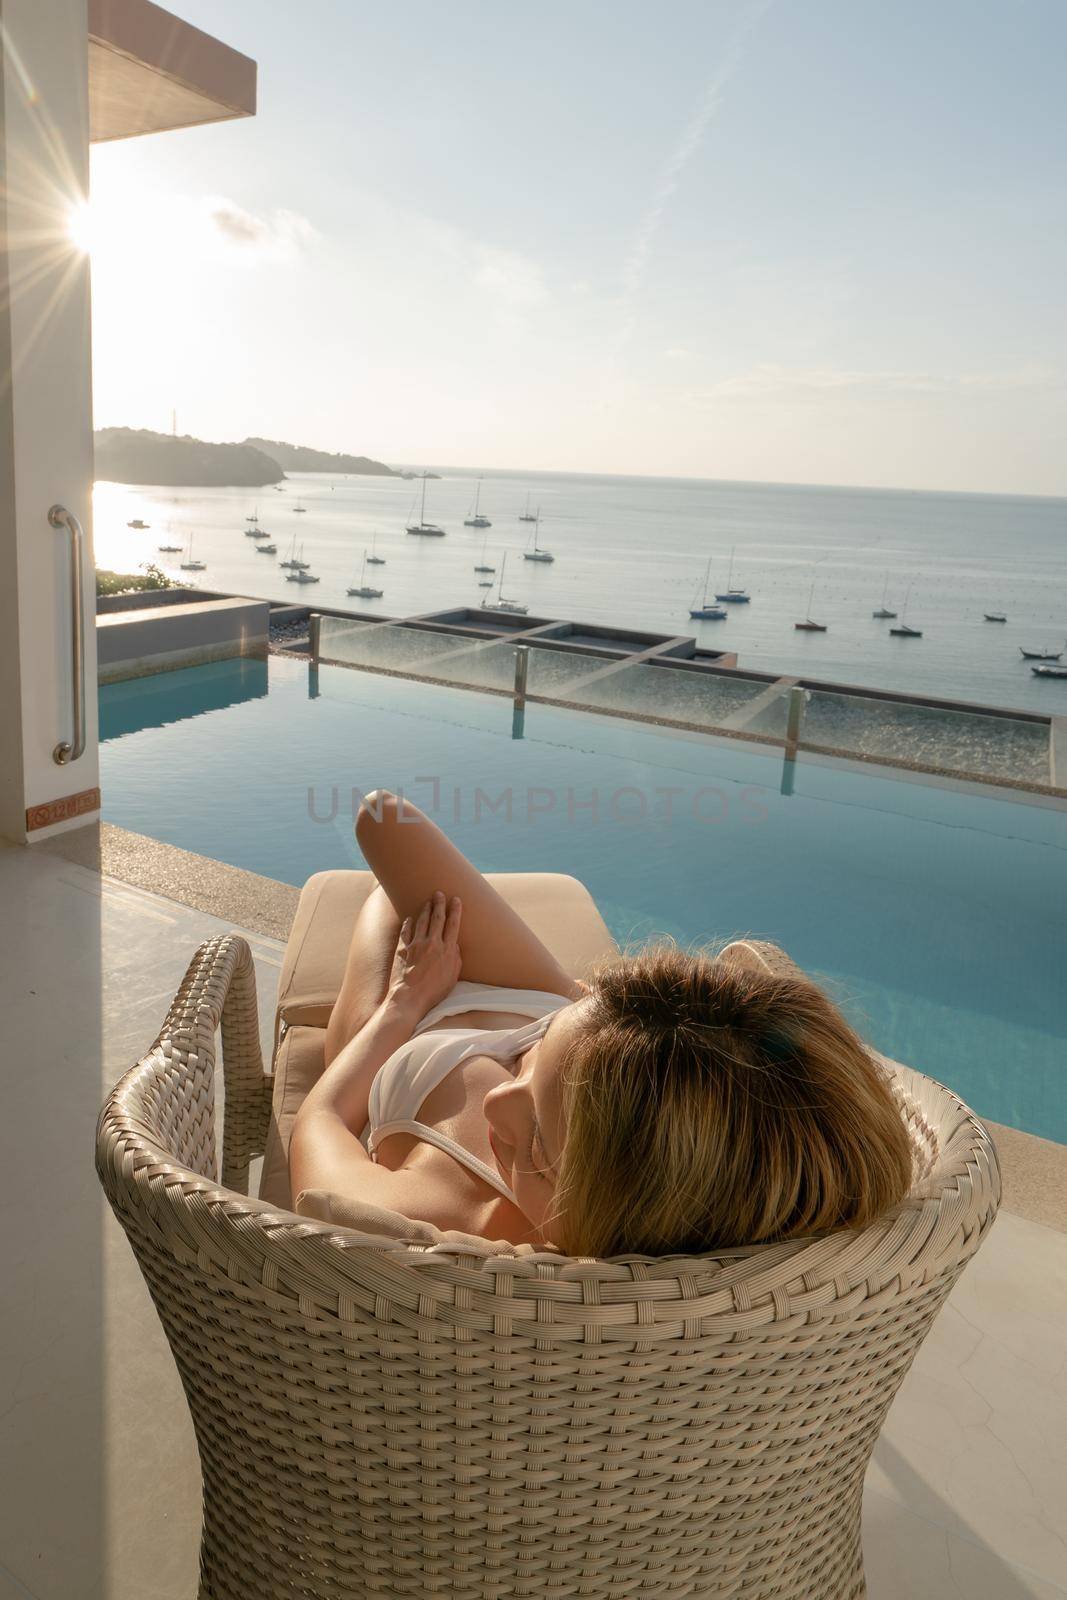 Woman lying on day bed in the balcony with pool and seaside view.